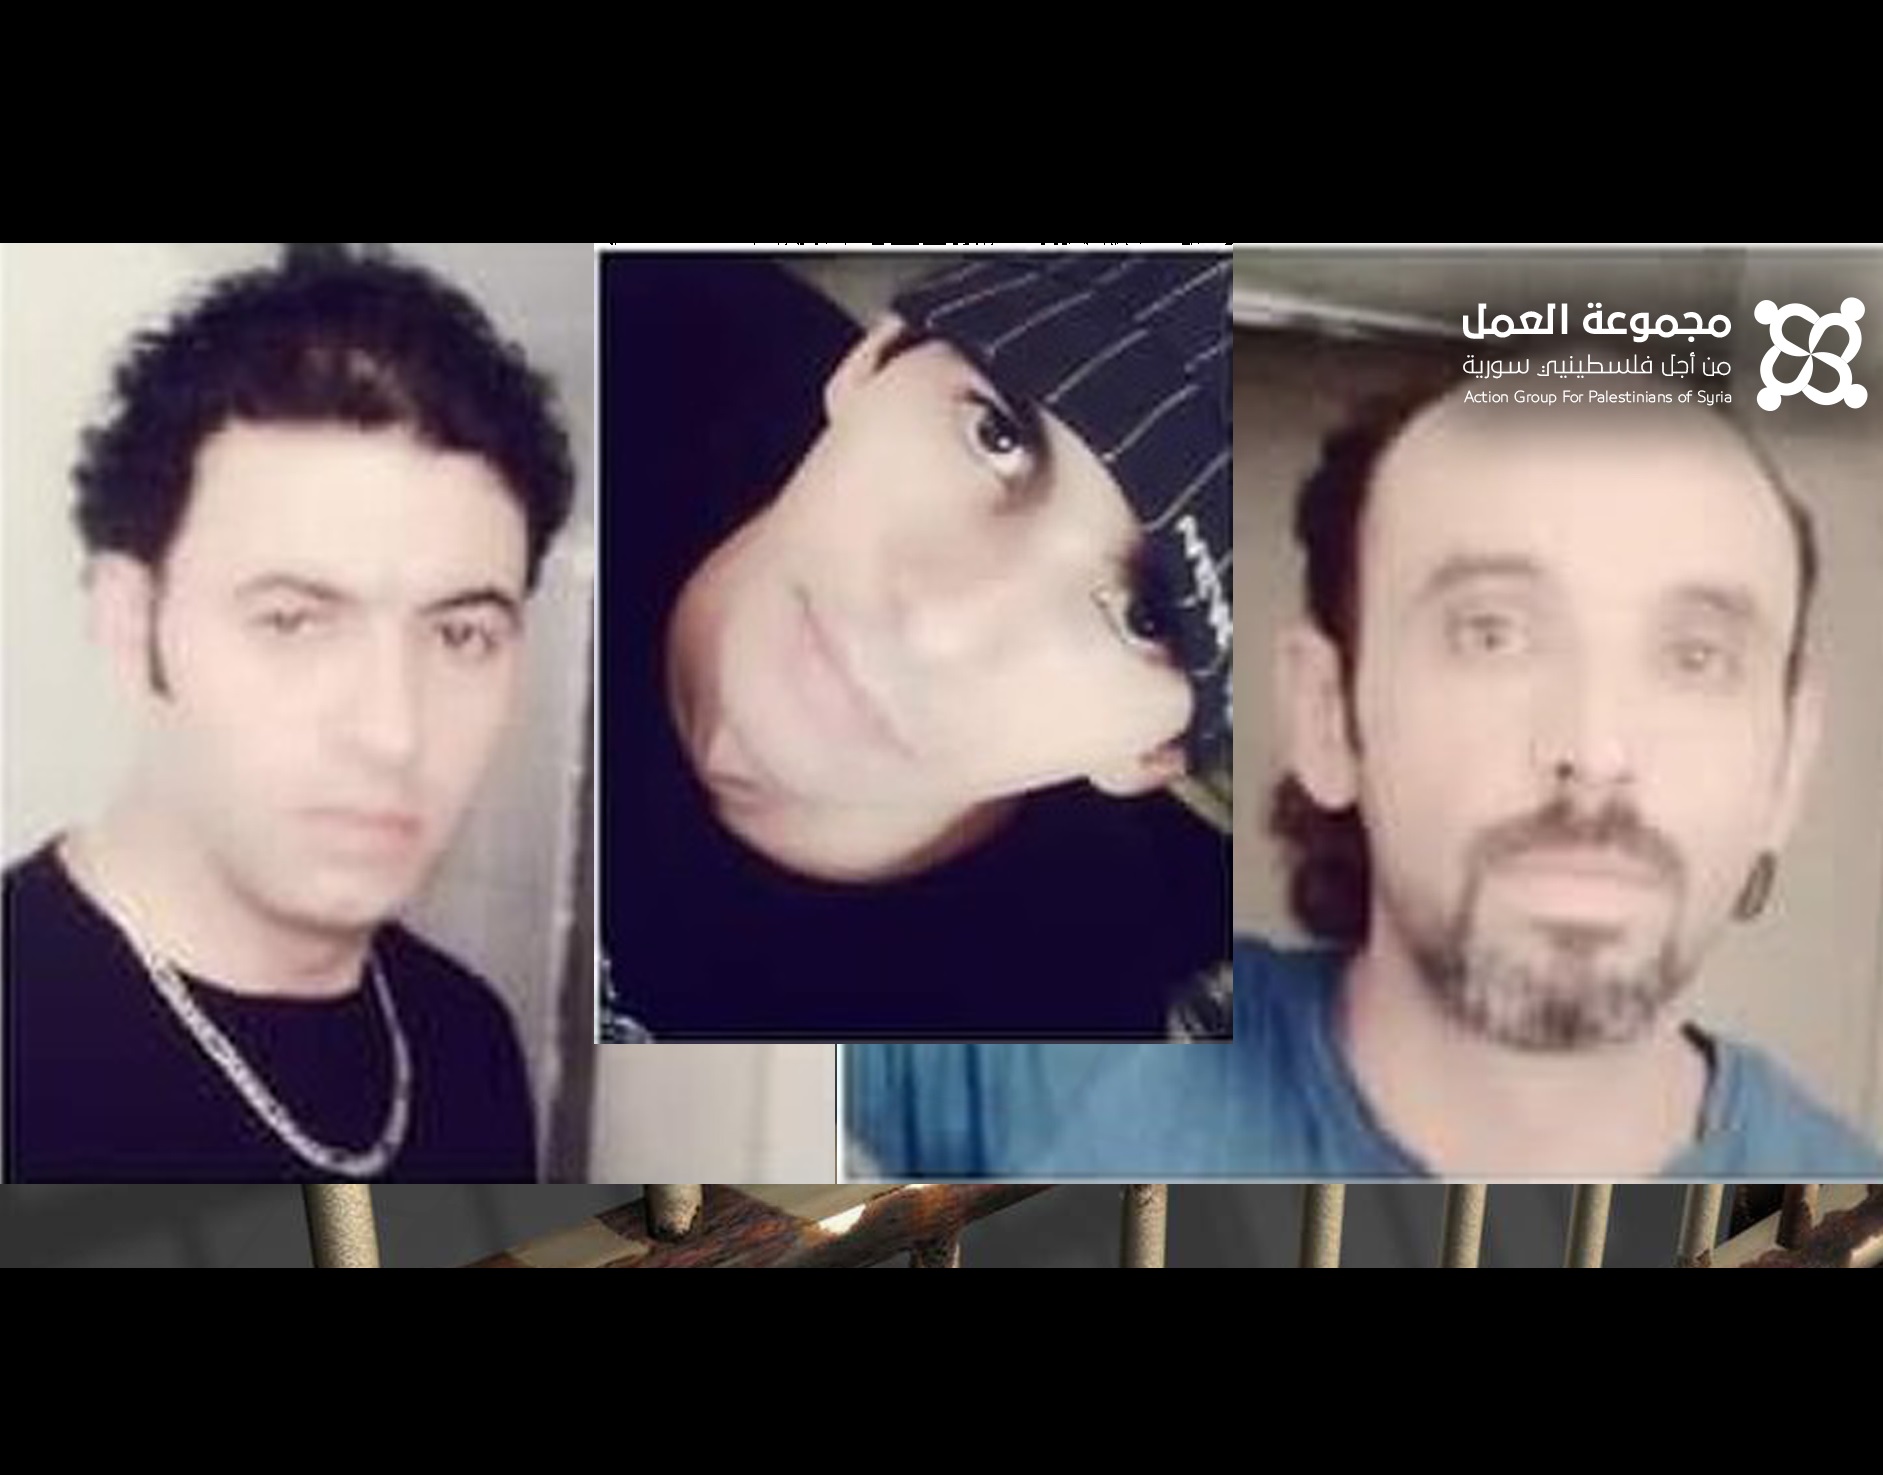 3 Palestinian Brothers & Their Mother Forcibly Disappeared by Syrian Regime for 9th Year